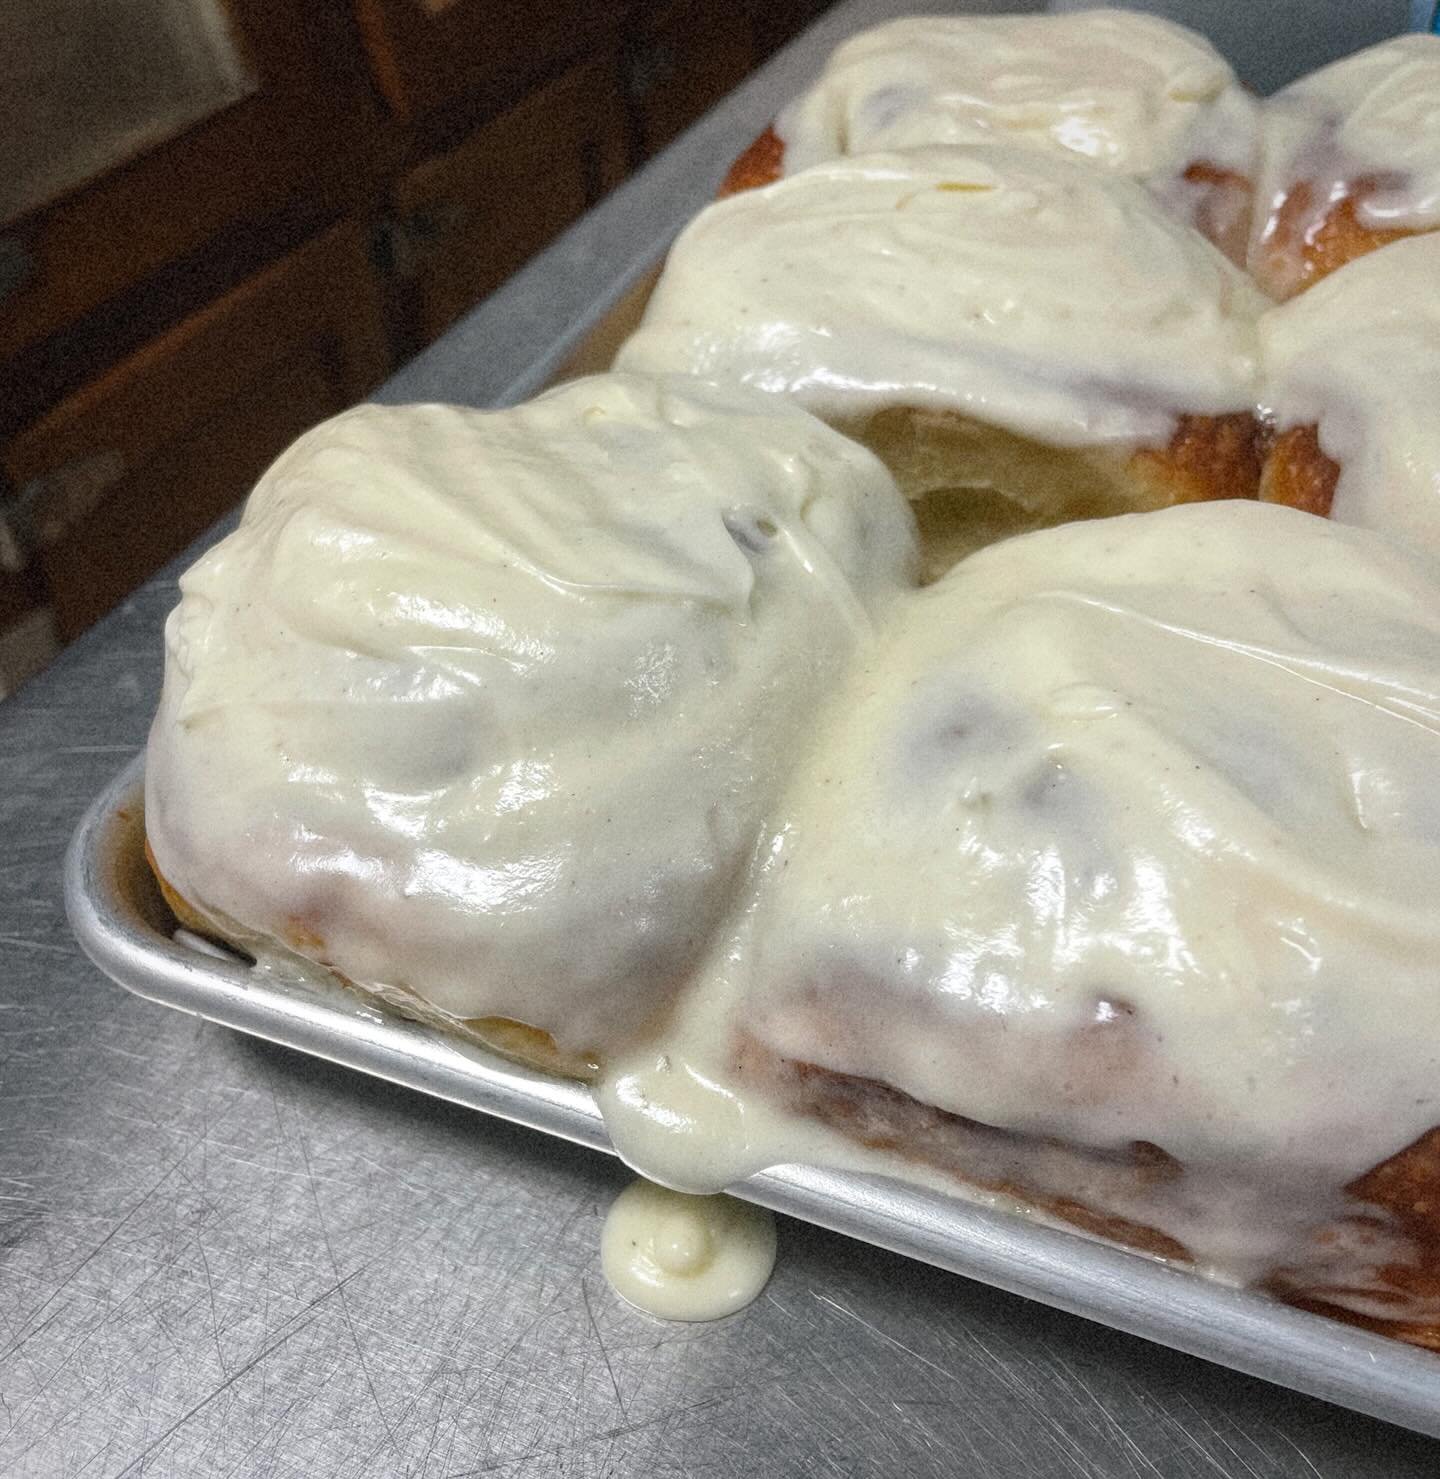 how much frosting is too much frosting..?

[cin buns here thurs-sun]